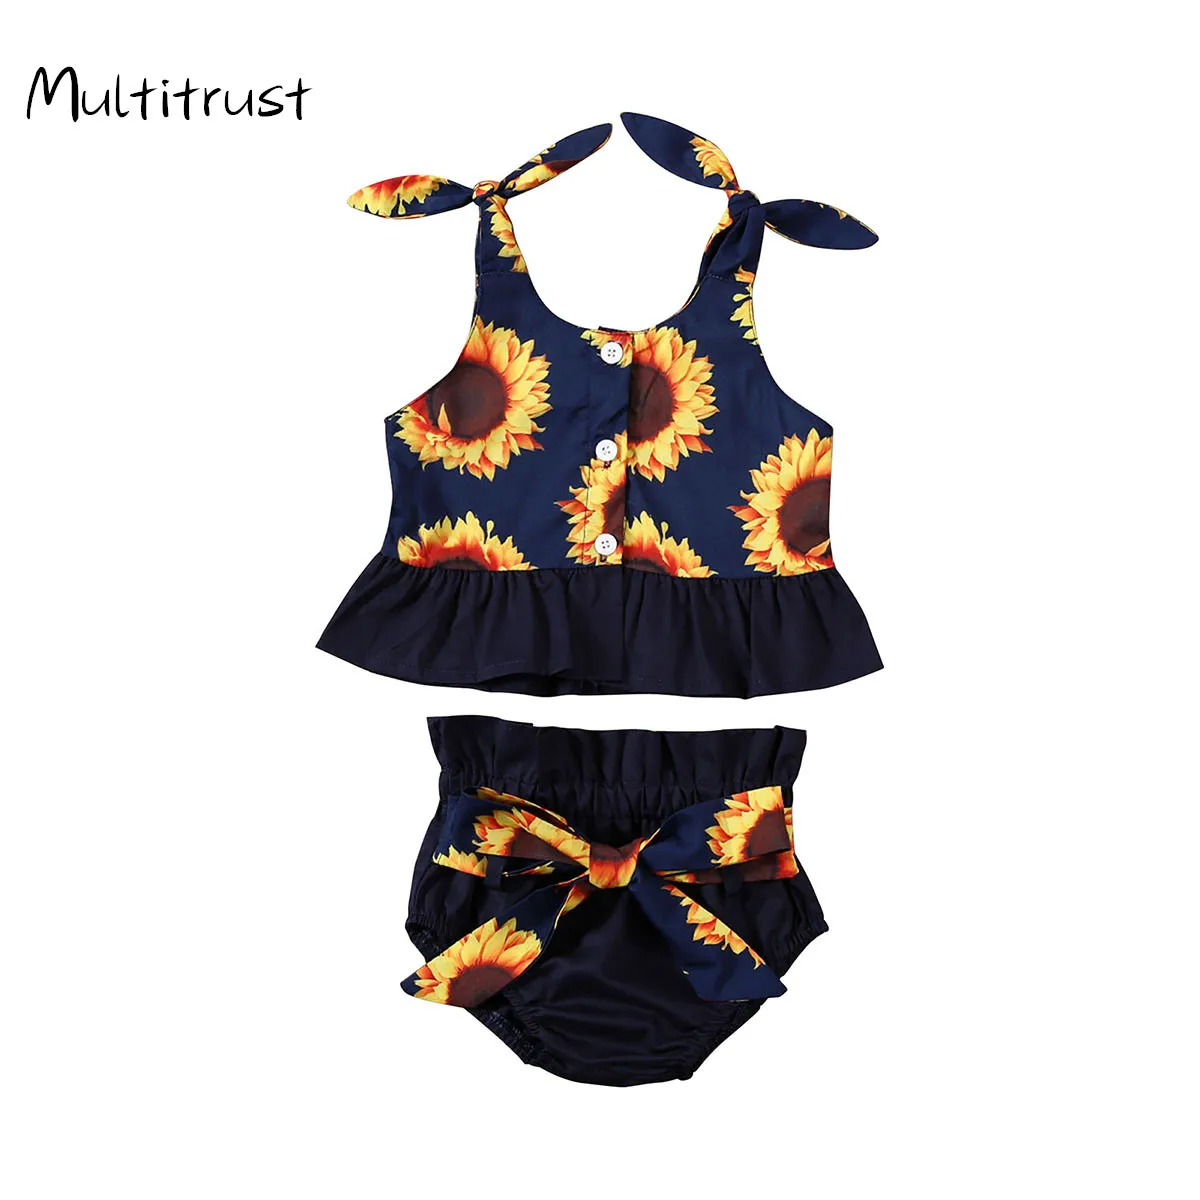 

Baby Girl Print Clothing Set Floral Sunflower Clothes Sleeveless Pullover Set Infant Kids Toddlers Clothes 0-24 Months